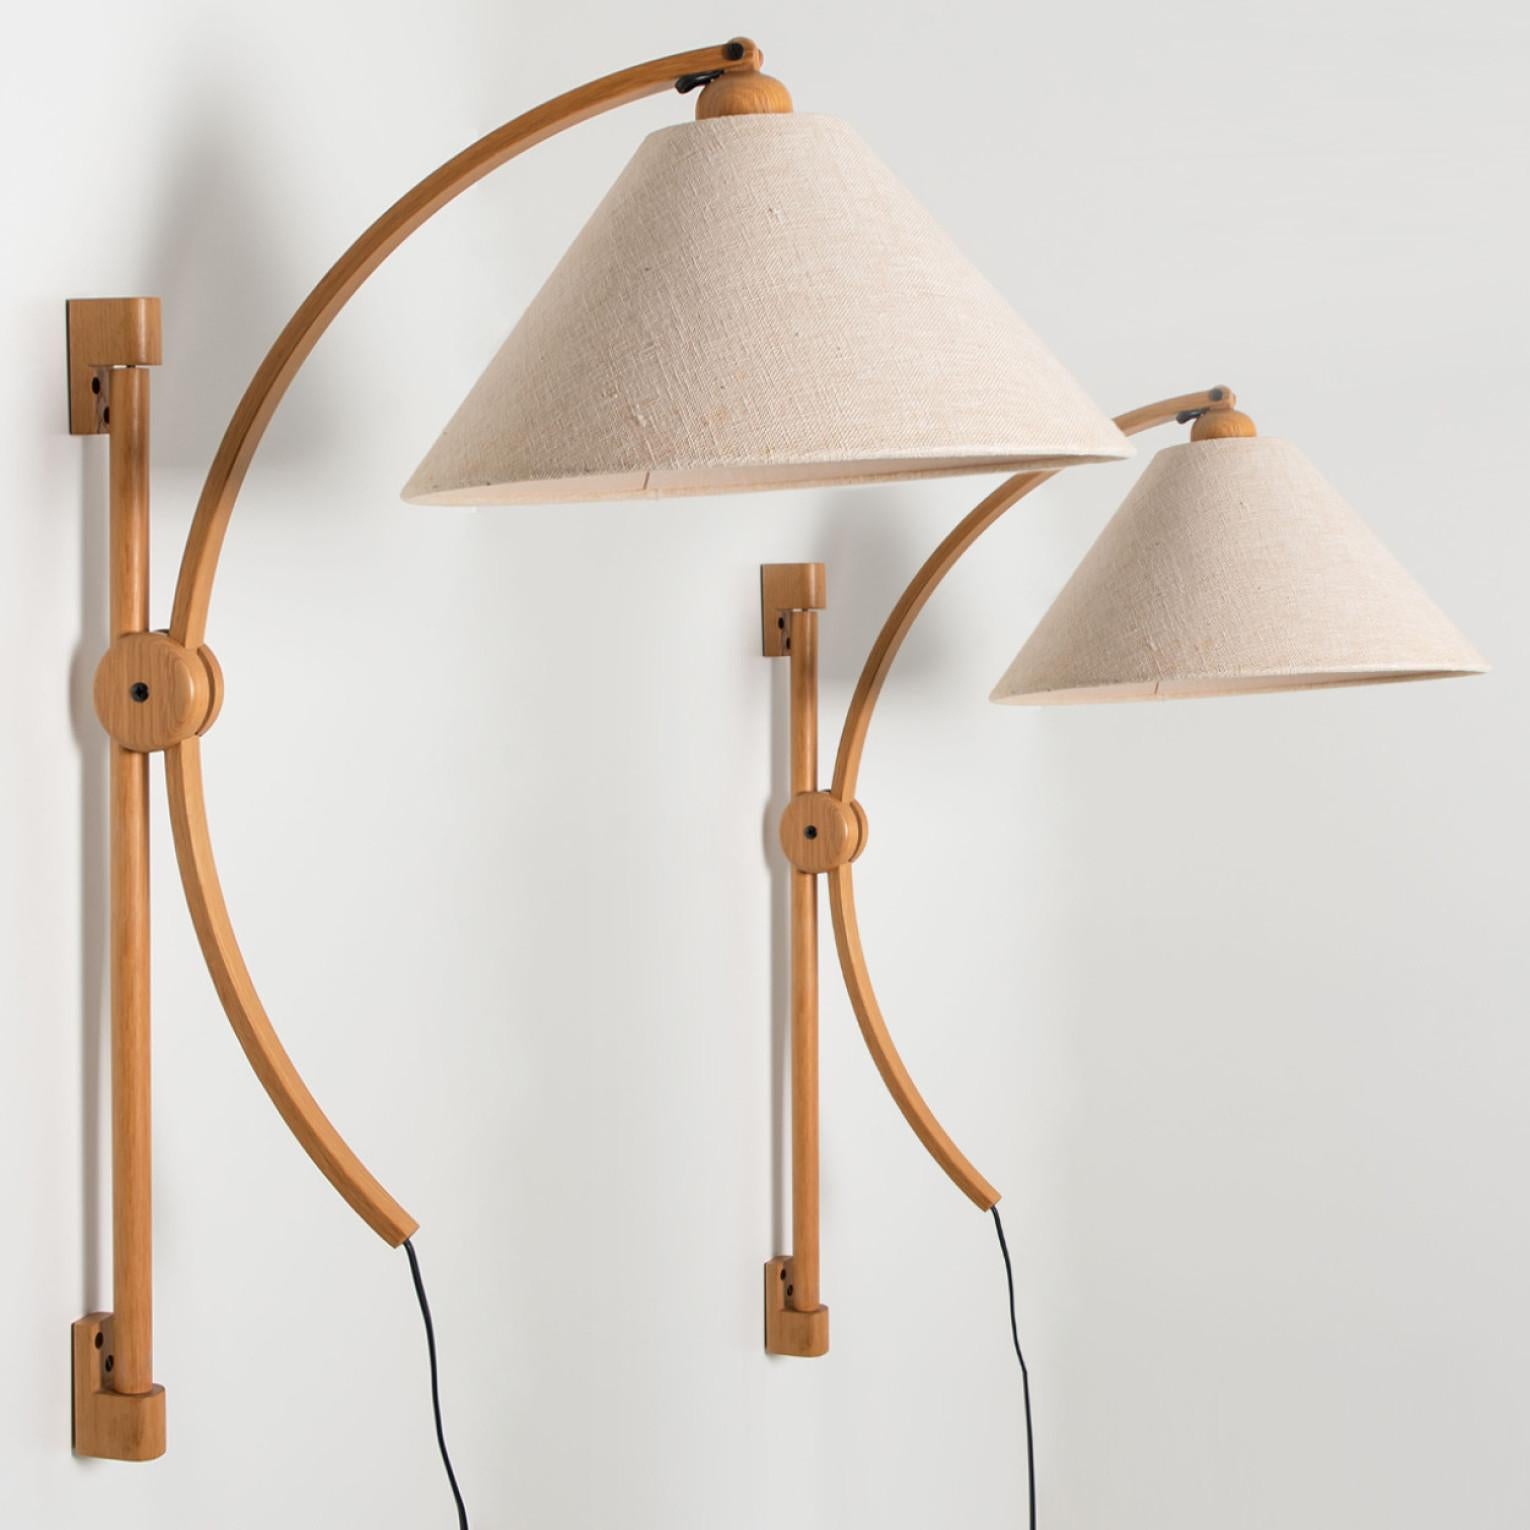 Pair of onderful oak wall lights with a natural toned original lampshade. Manufactured by Domus in the 1970s in Germany, Europe.
The oak base is adjustable in height. The original natural lampshade diffuses a warm light.

